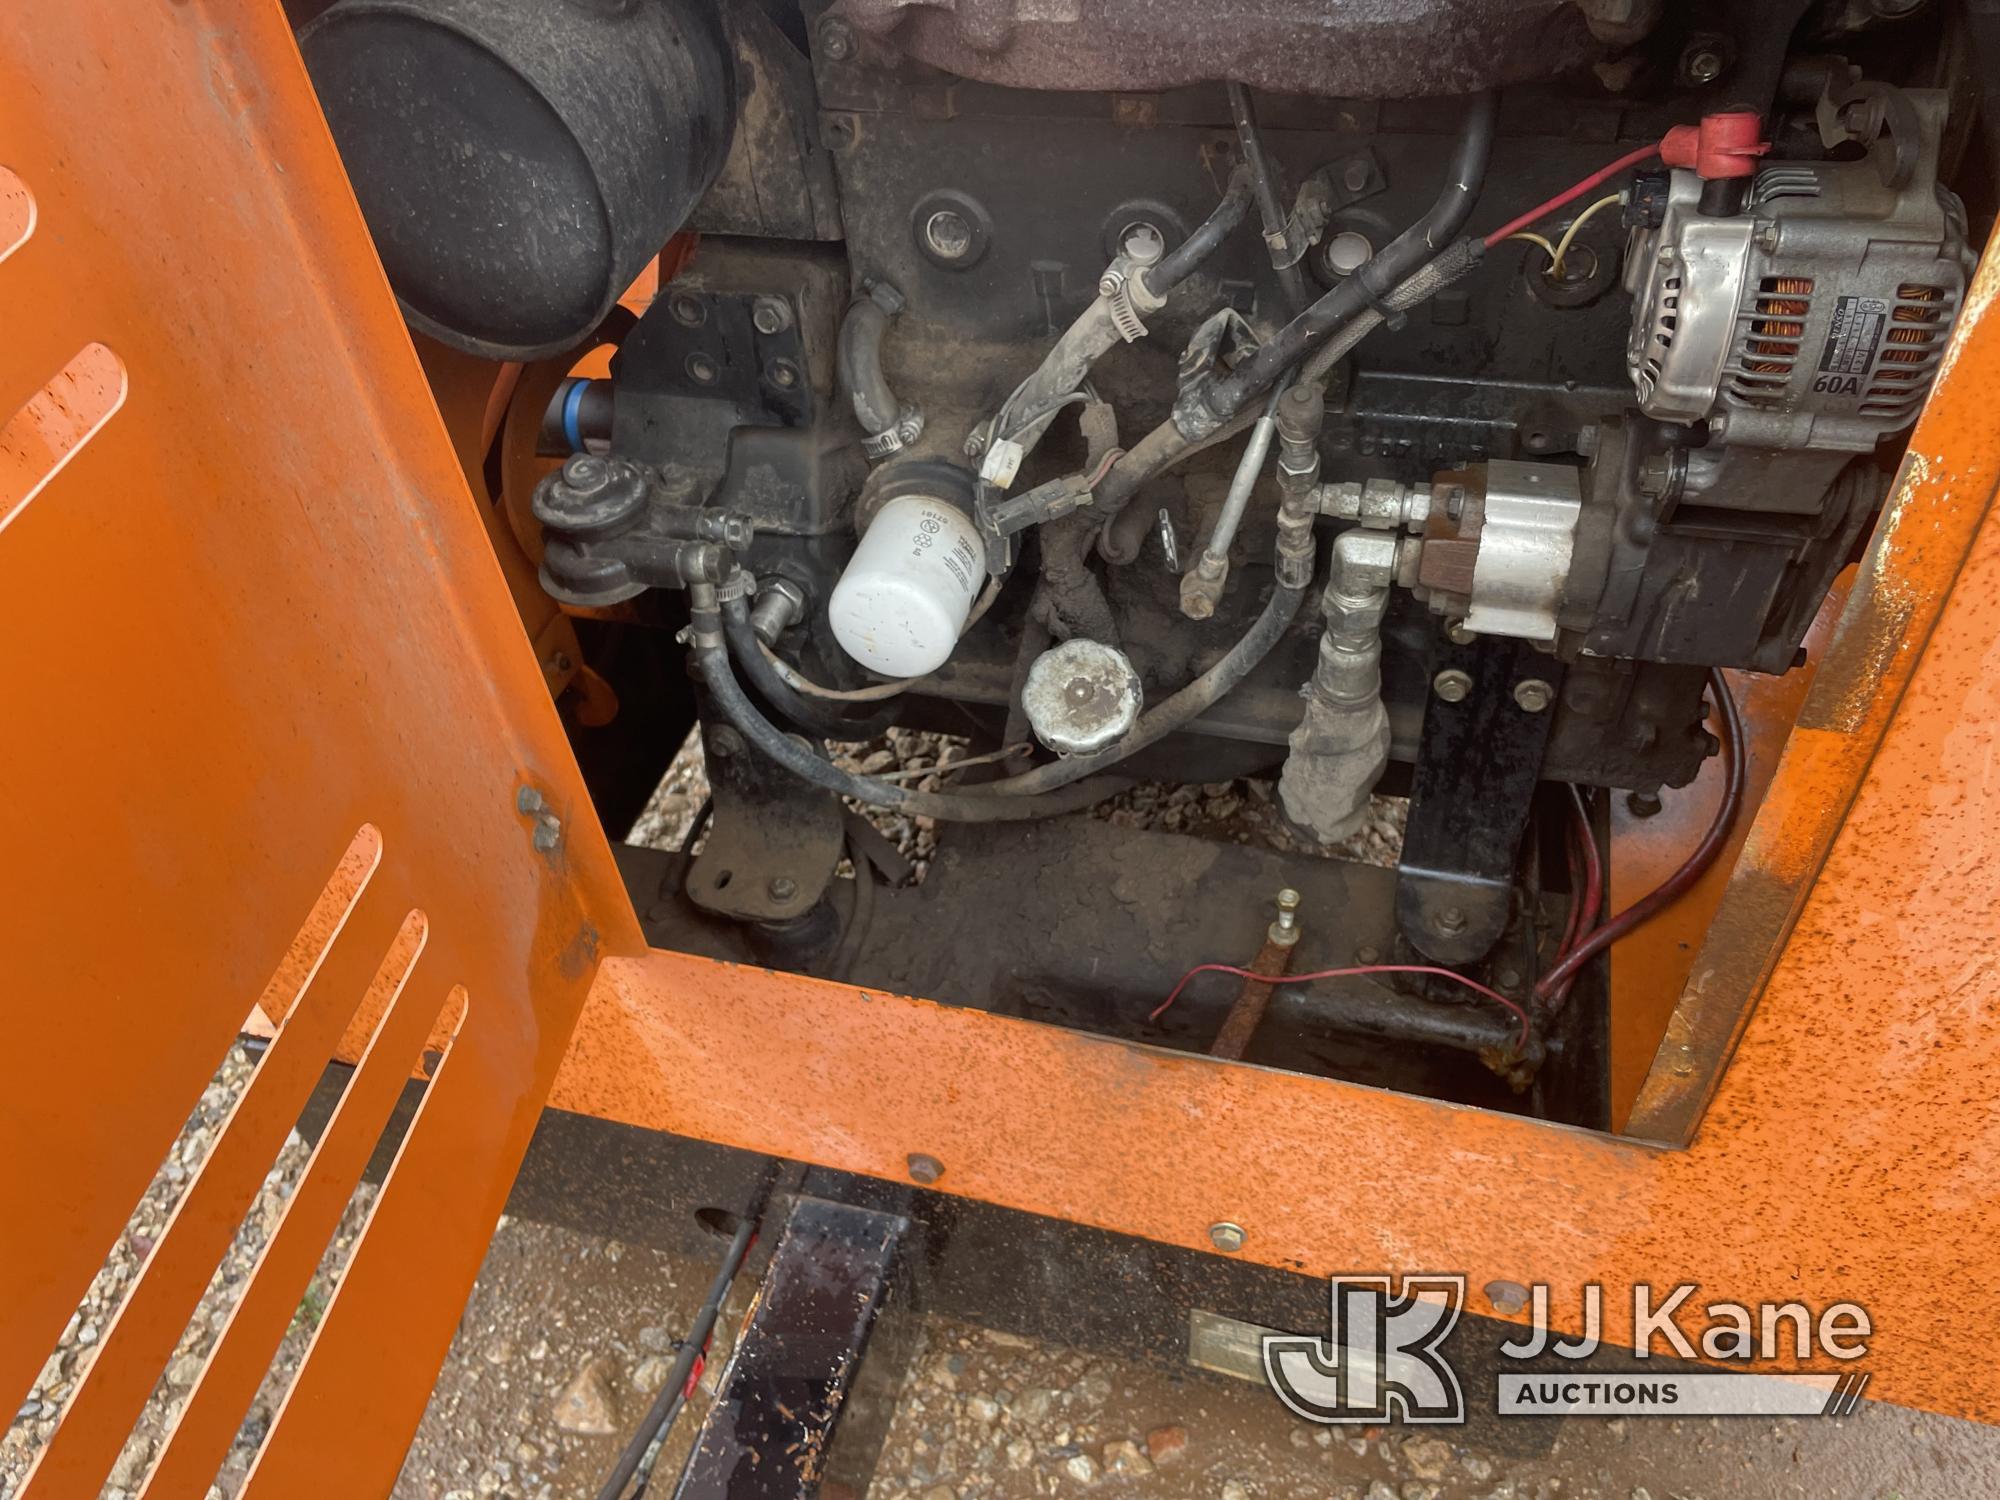 (Oklahoma City, OK) 2012 Vermeer BC1000XL Chipper (12in Drum) Not Running, Condition Unknown, Parts